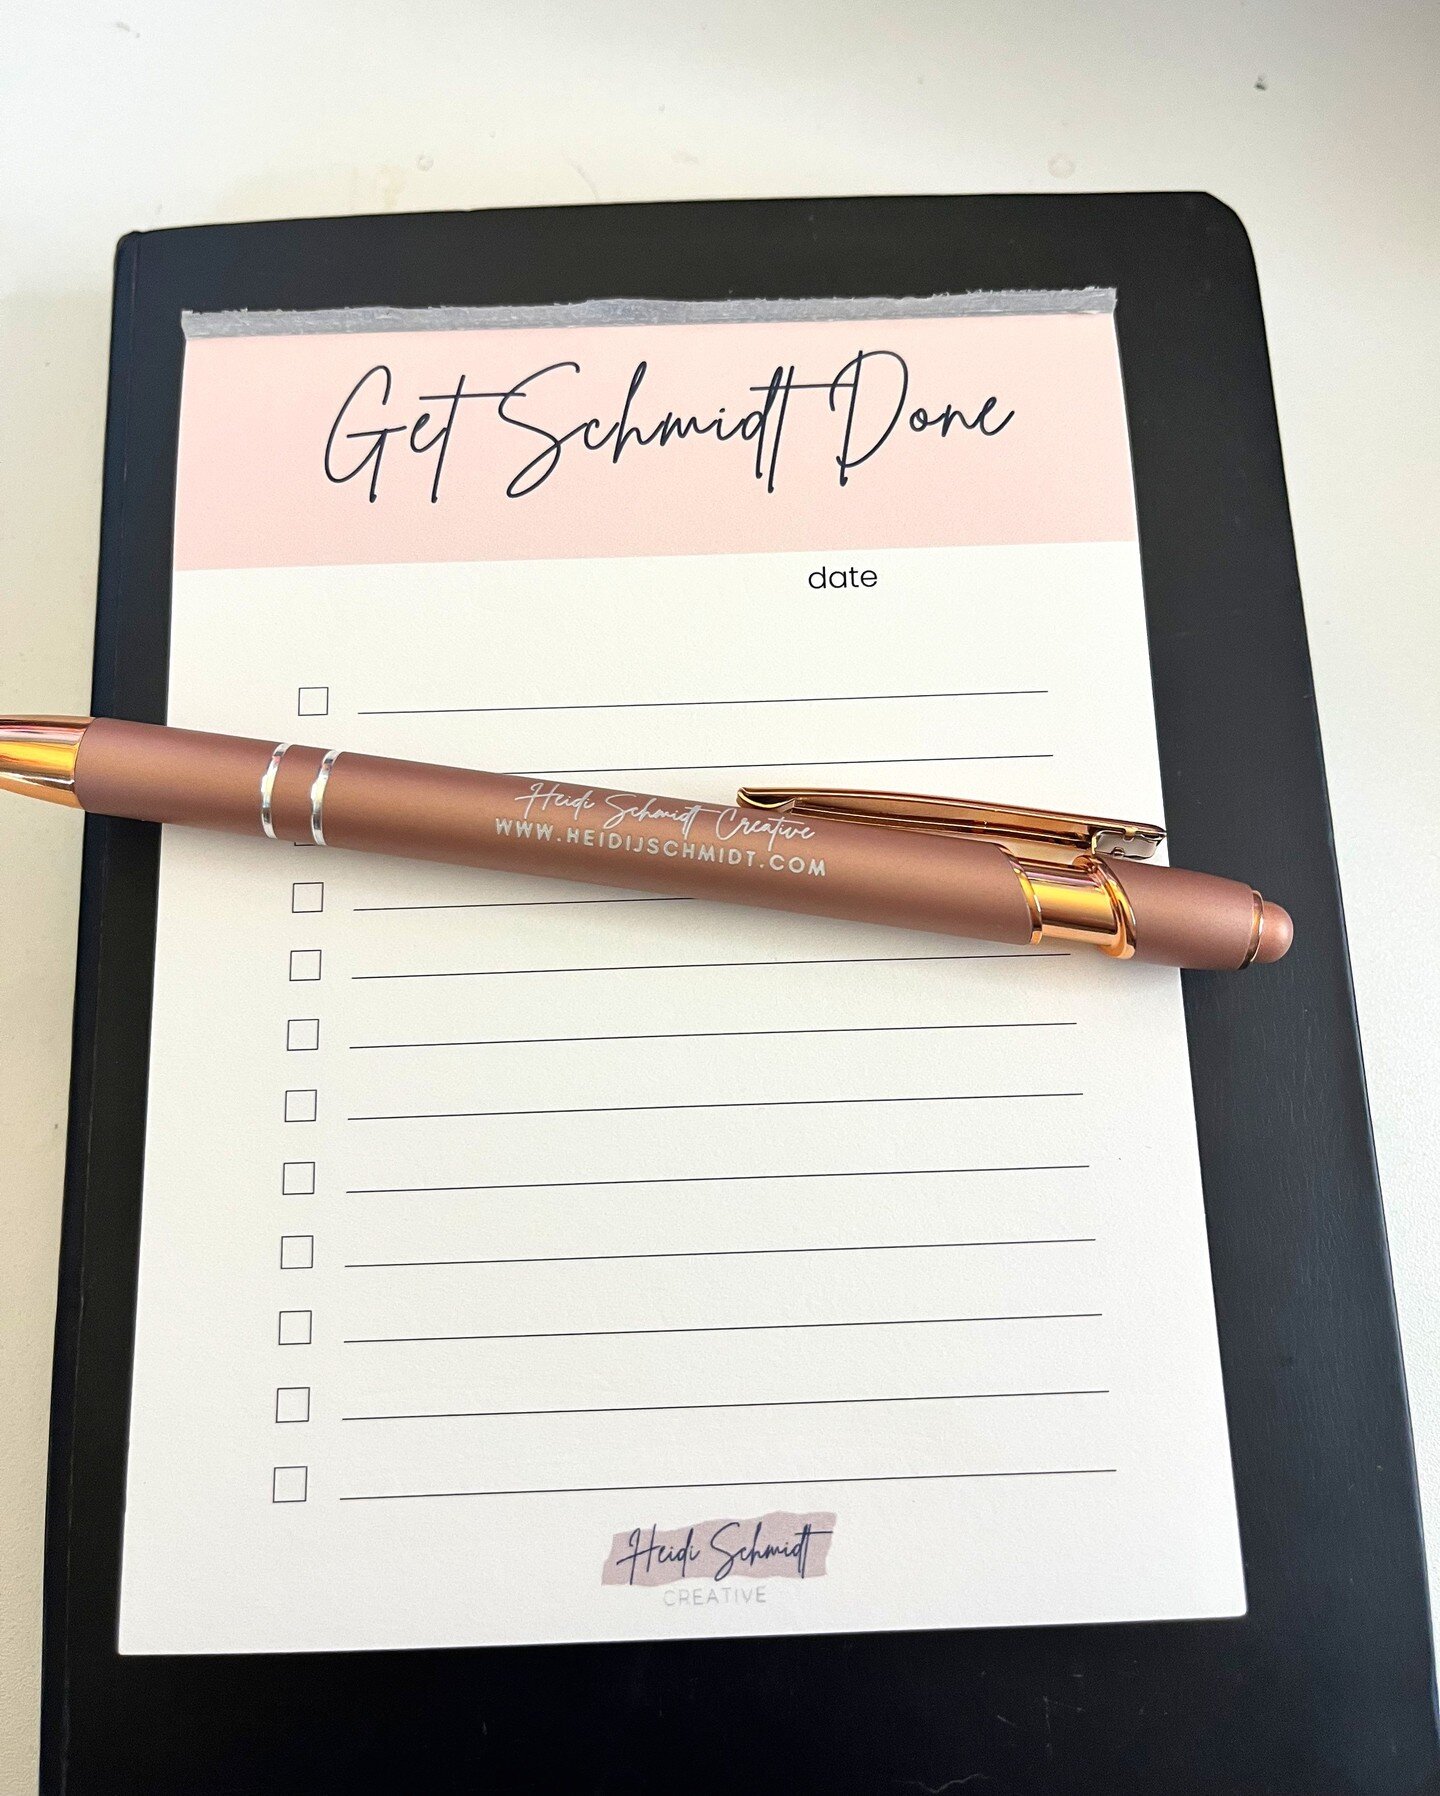 So many treats over here! 🥰🥰

So excited about these amazing pens (thank you @IdeaWeaving!) that go perfectly with my Get Schmidt Done notepads! 

I feel like the past month I've made some big moves and I'm jazzed for the next few months are going 